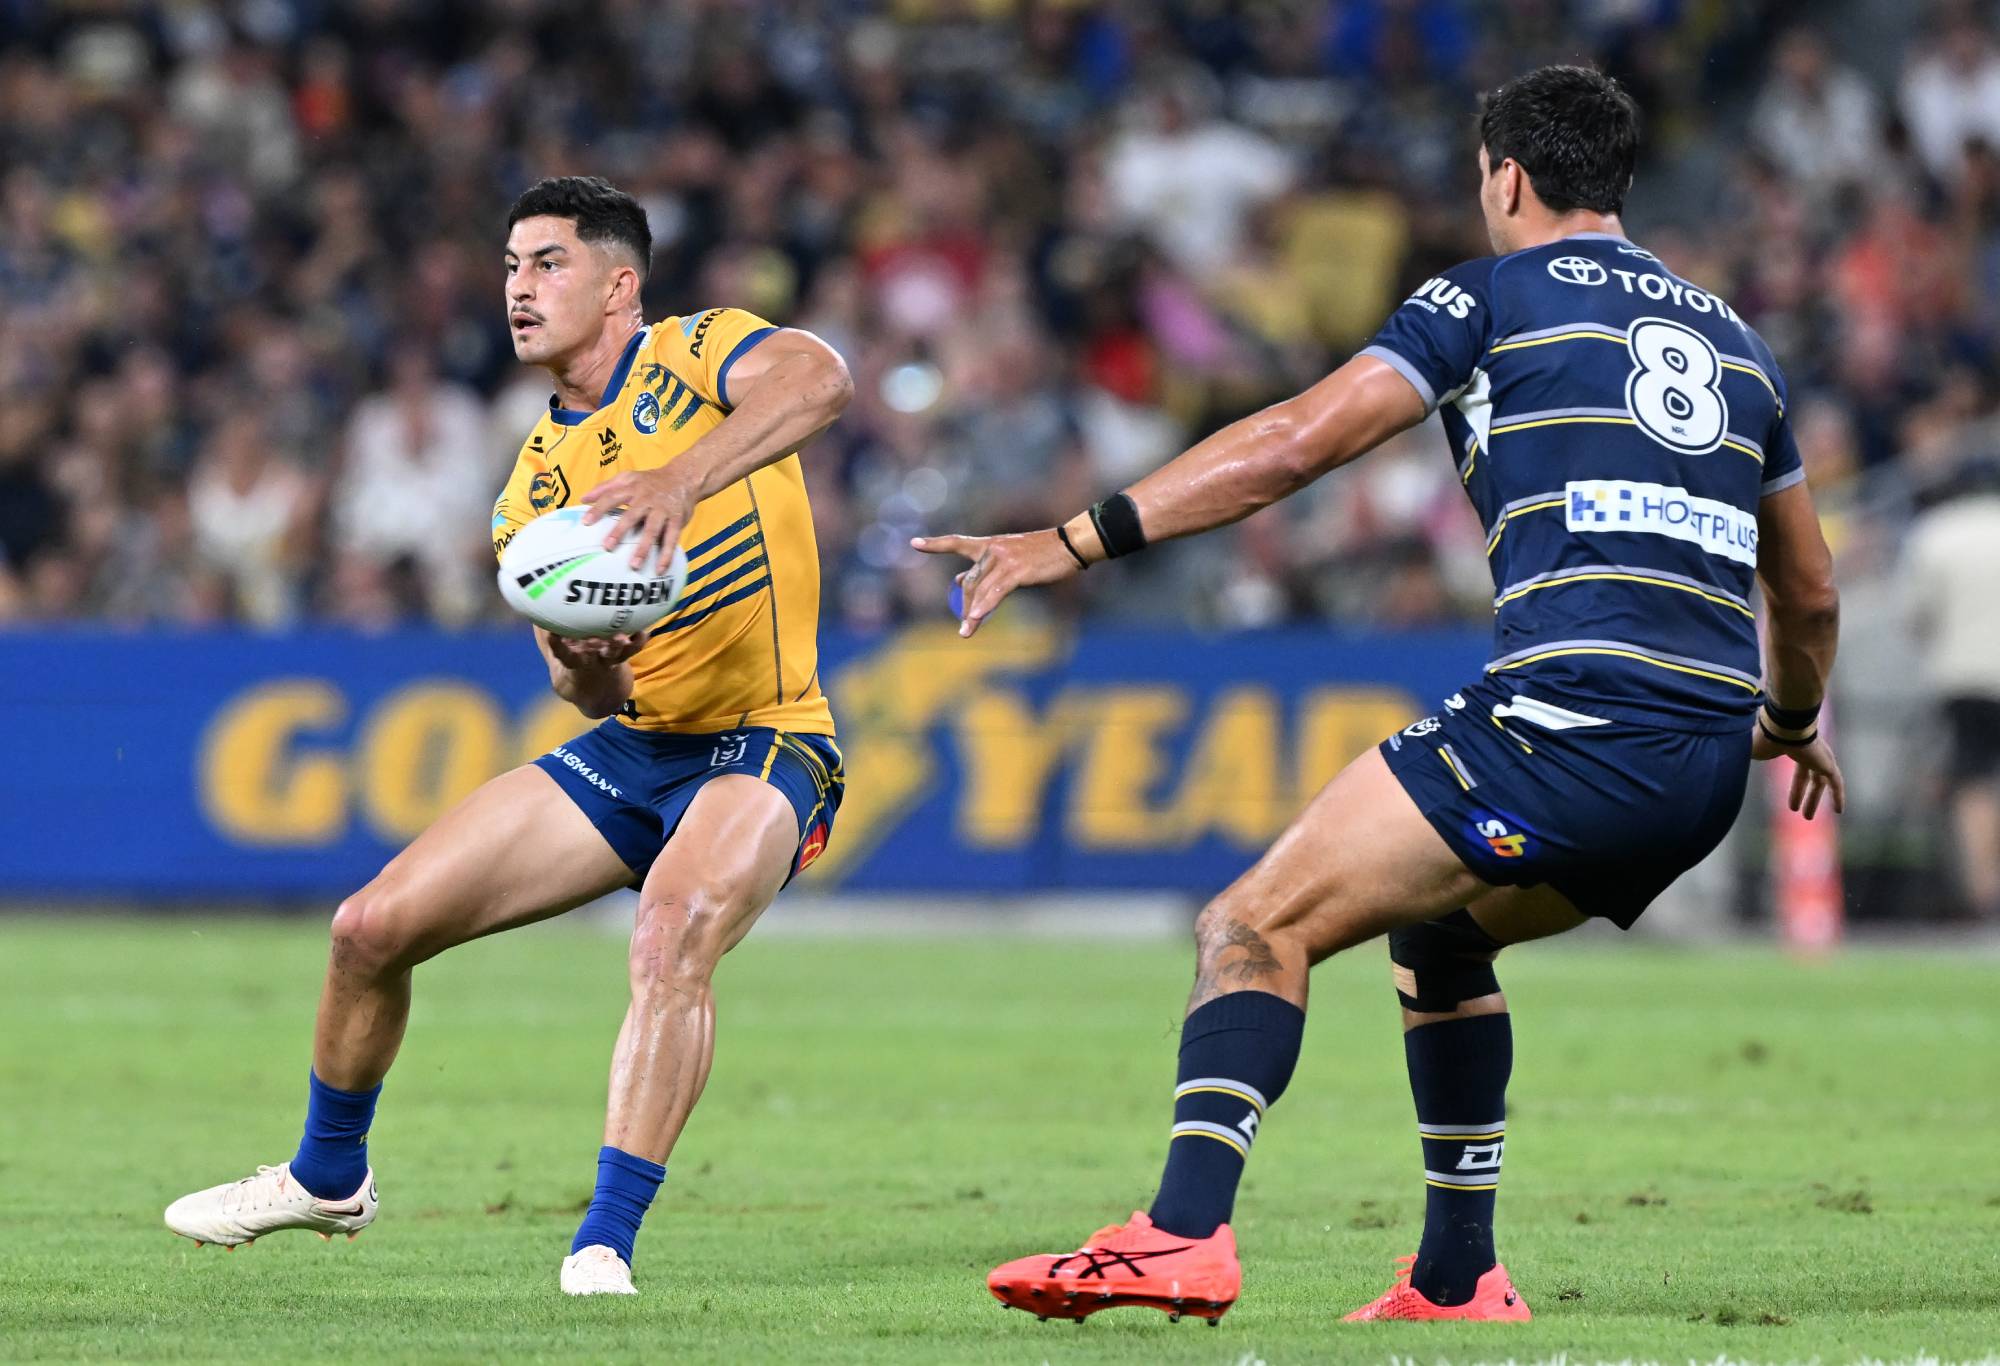 TOWNSAVILLE, AUSTRALIA - SEPTEMBER 23: Dylan Brown of the Eels passes during the NRL Preliminary Final match between the North Queensland Cowboys and the Parramatta Eels at Queensland Country Bank Stadium on September 23, 2022 in Townsville, Australia. (Photo by Bradley Kanaris/Getty Images)